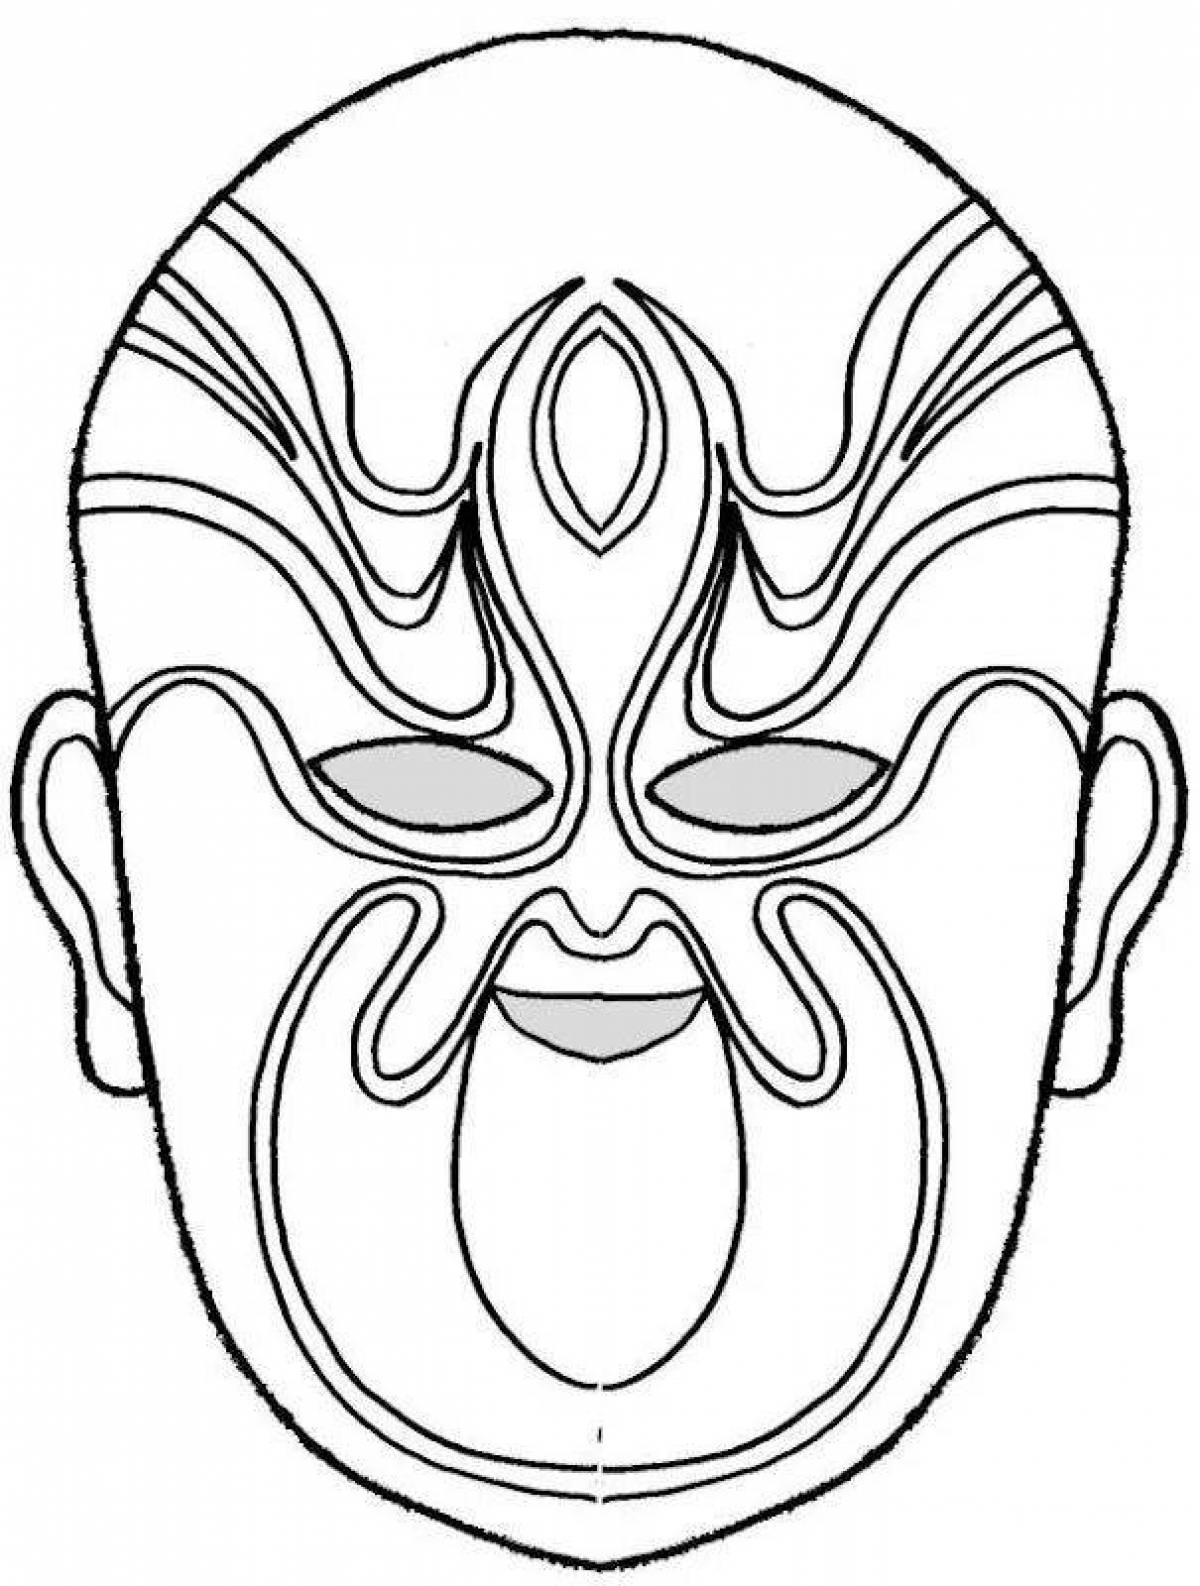 Coloring sheet lovely fabric mask